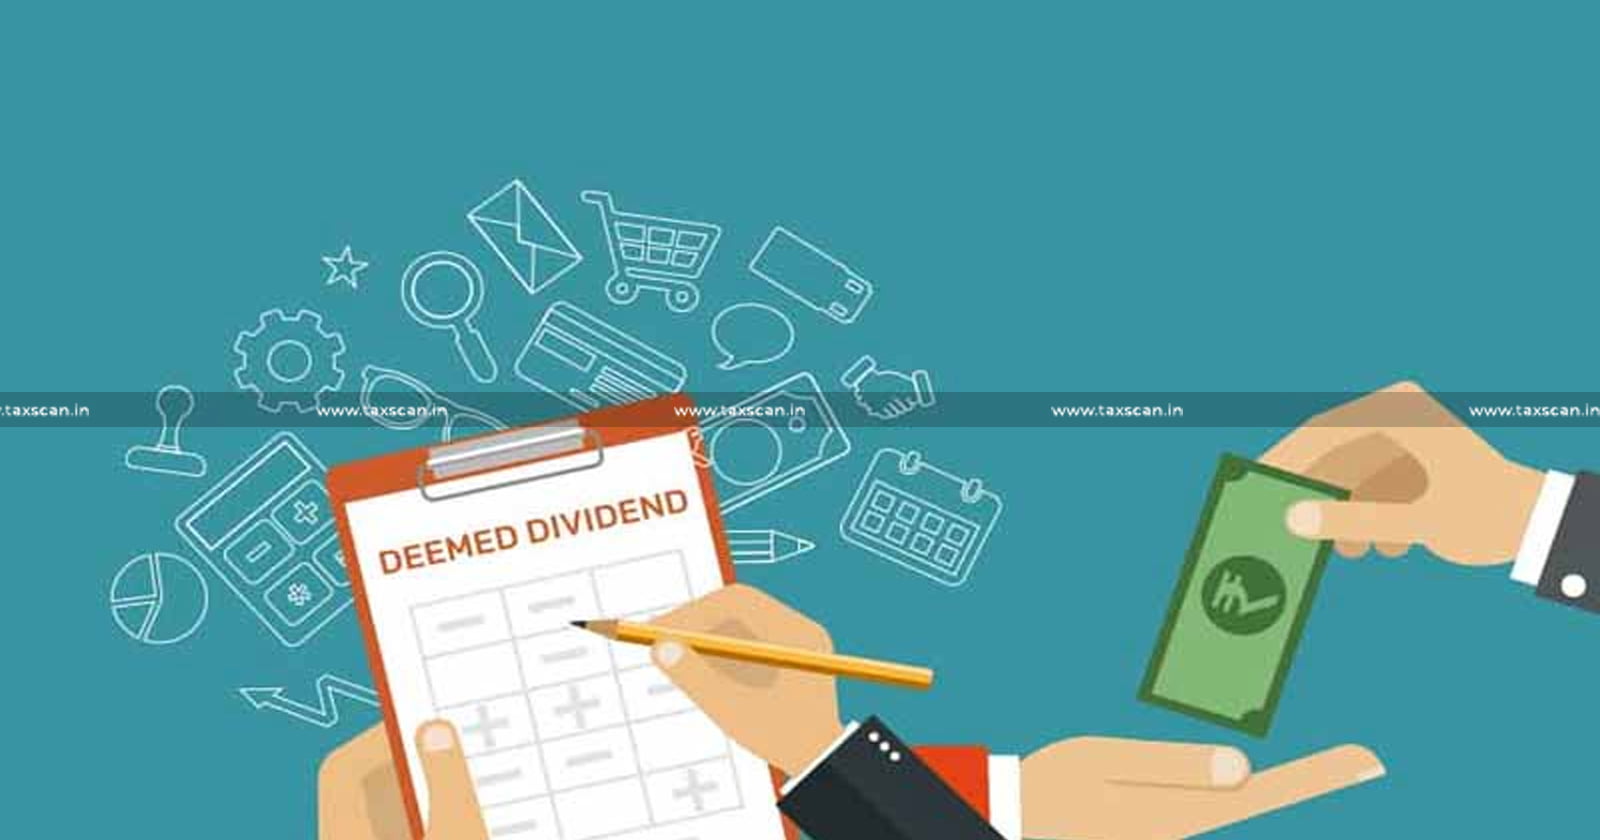 Deemed Dividend - Provisions - Income Tax Act - Shareholder - ITAT - Income Tax - TAXSCAN